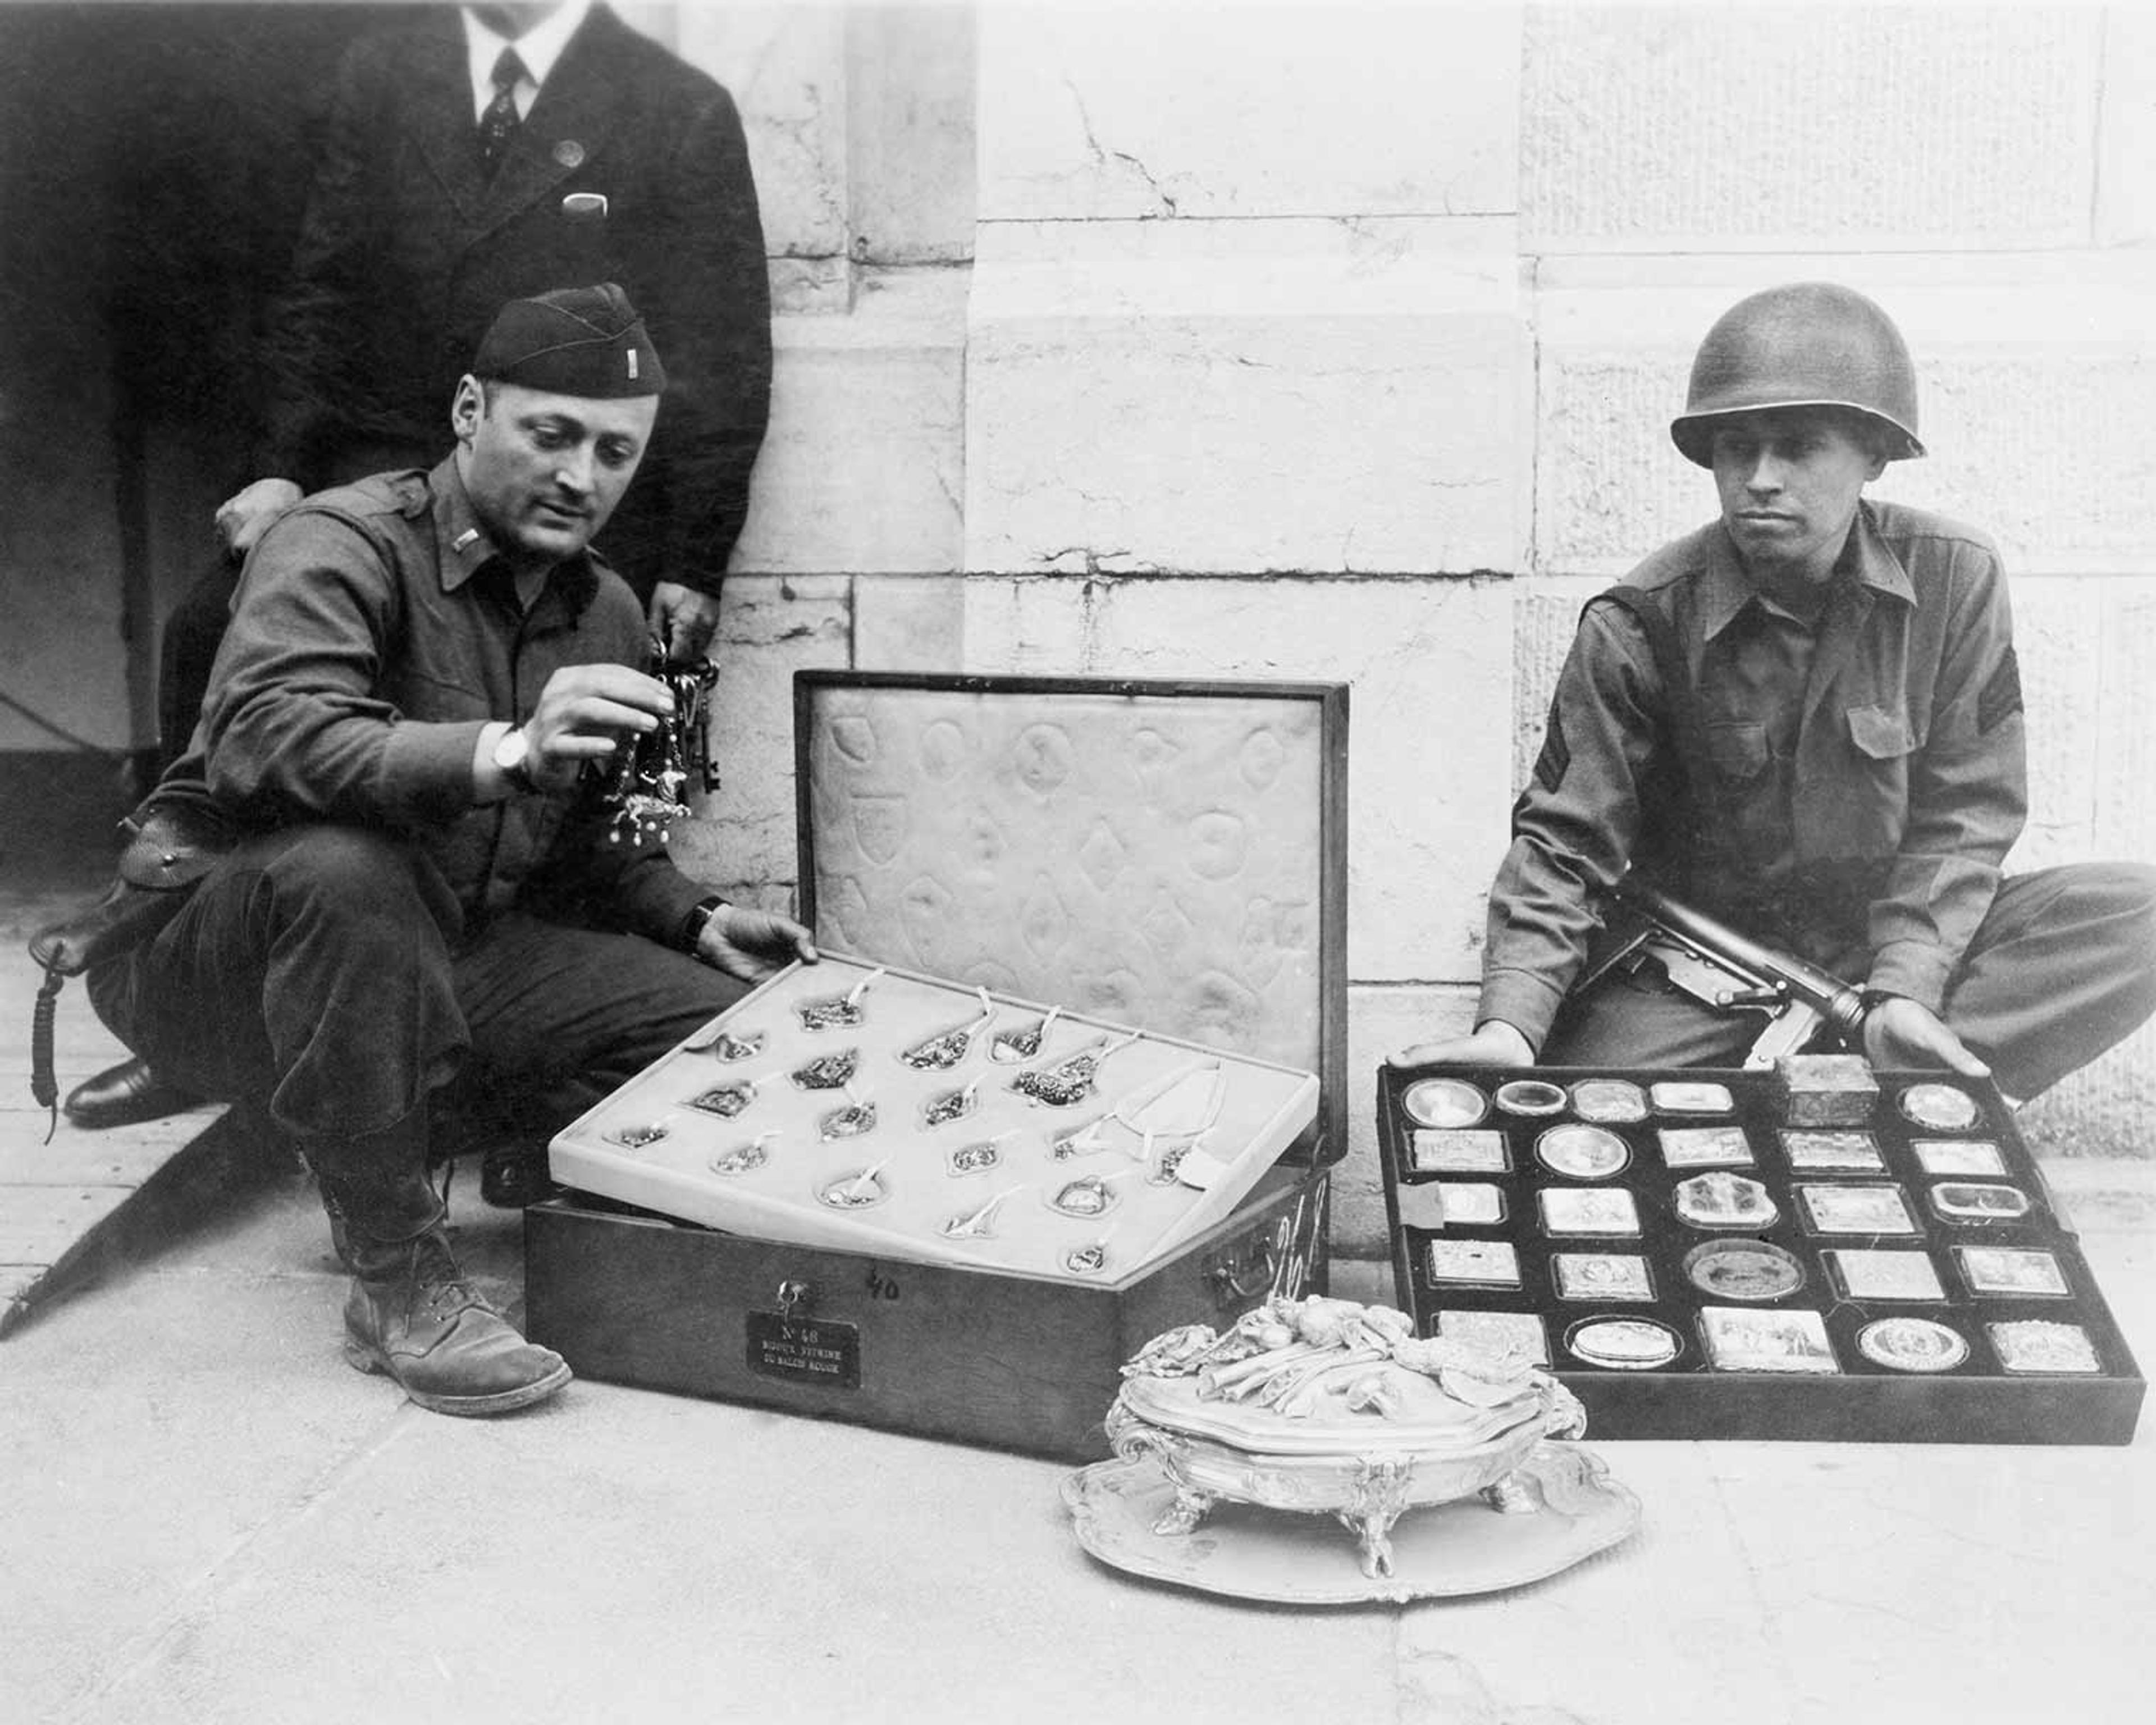 Black and white phot of two soldiers looking at a suitcase with art objects in it